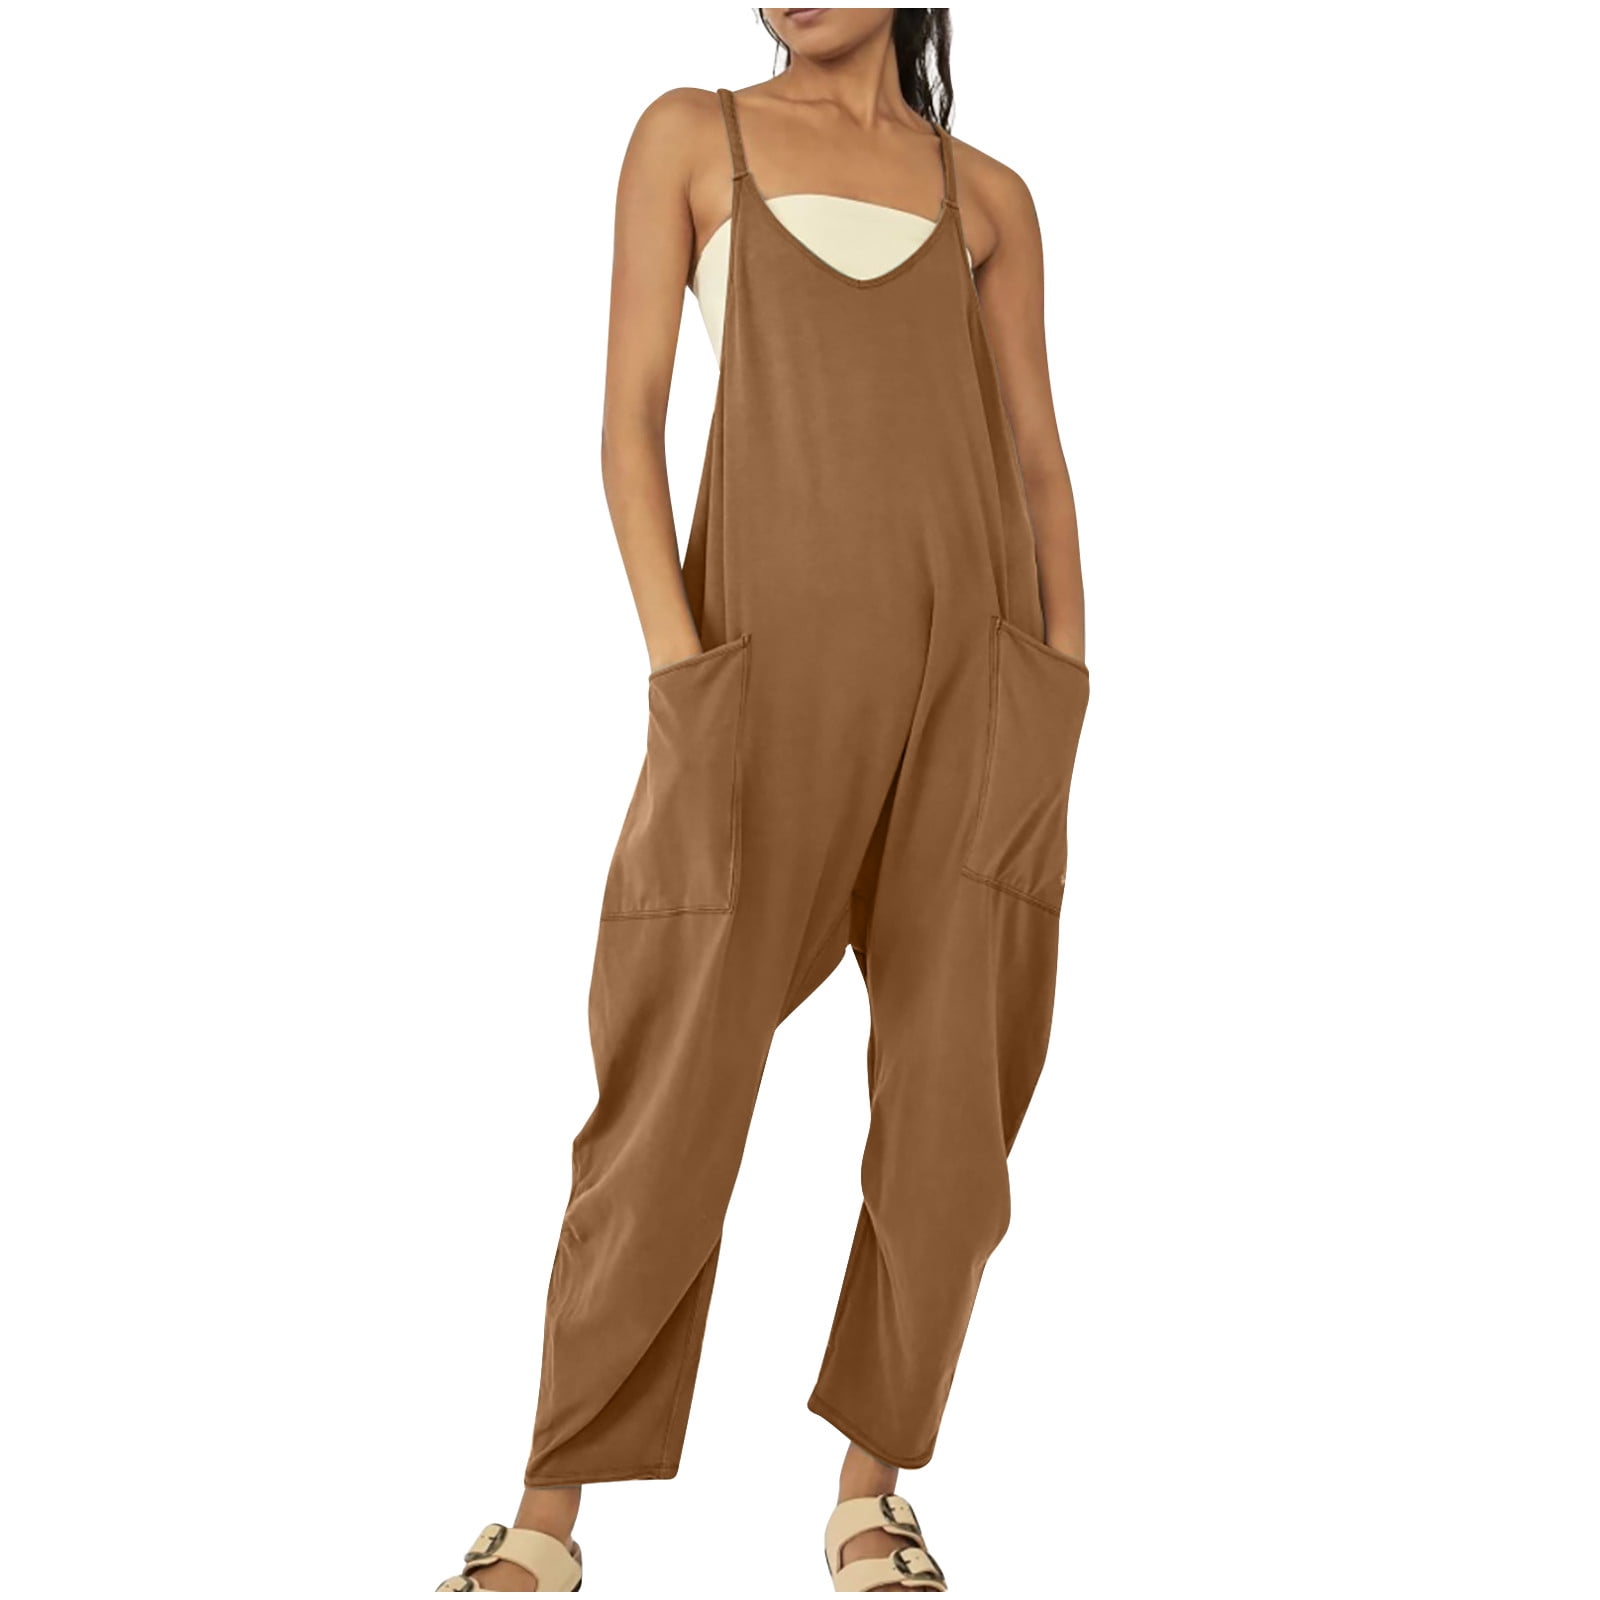 Gå i stykker Indrømme beundring Women's Loose Sleeveless Jumpsuits Spaghetti Strap Stretchy Long Pant Romper  Jumpsuit with Pockets Casual Solid Wide Leg Pants - Walmart.com